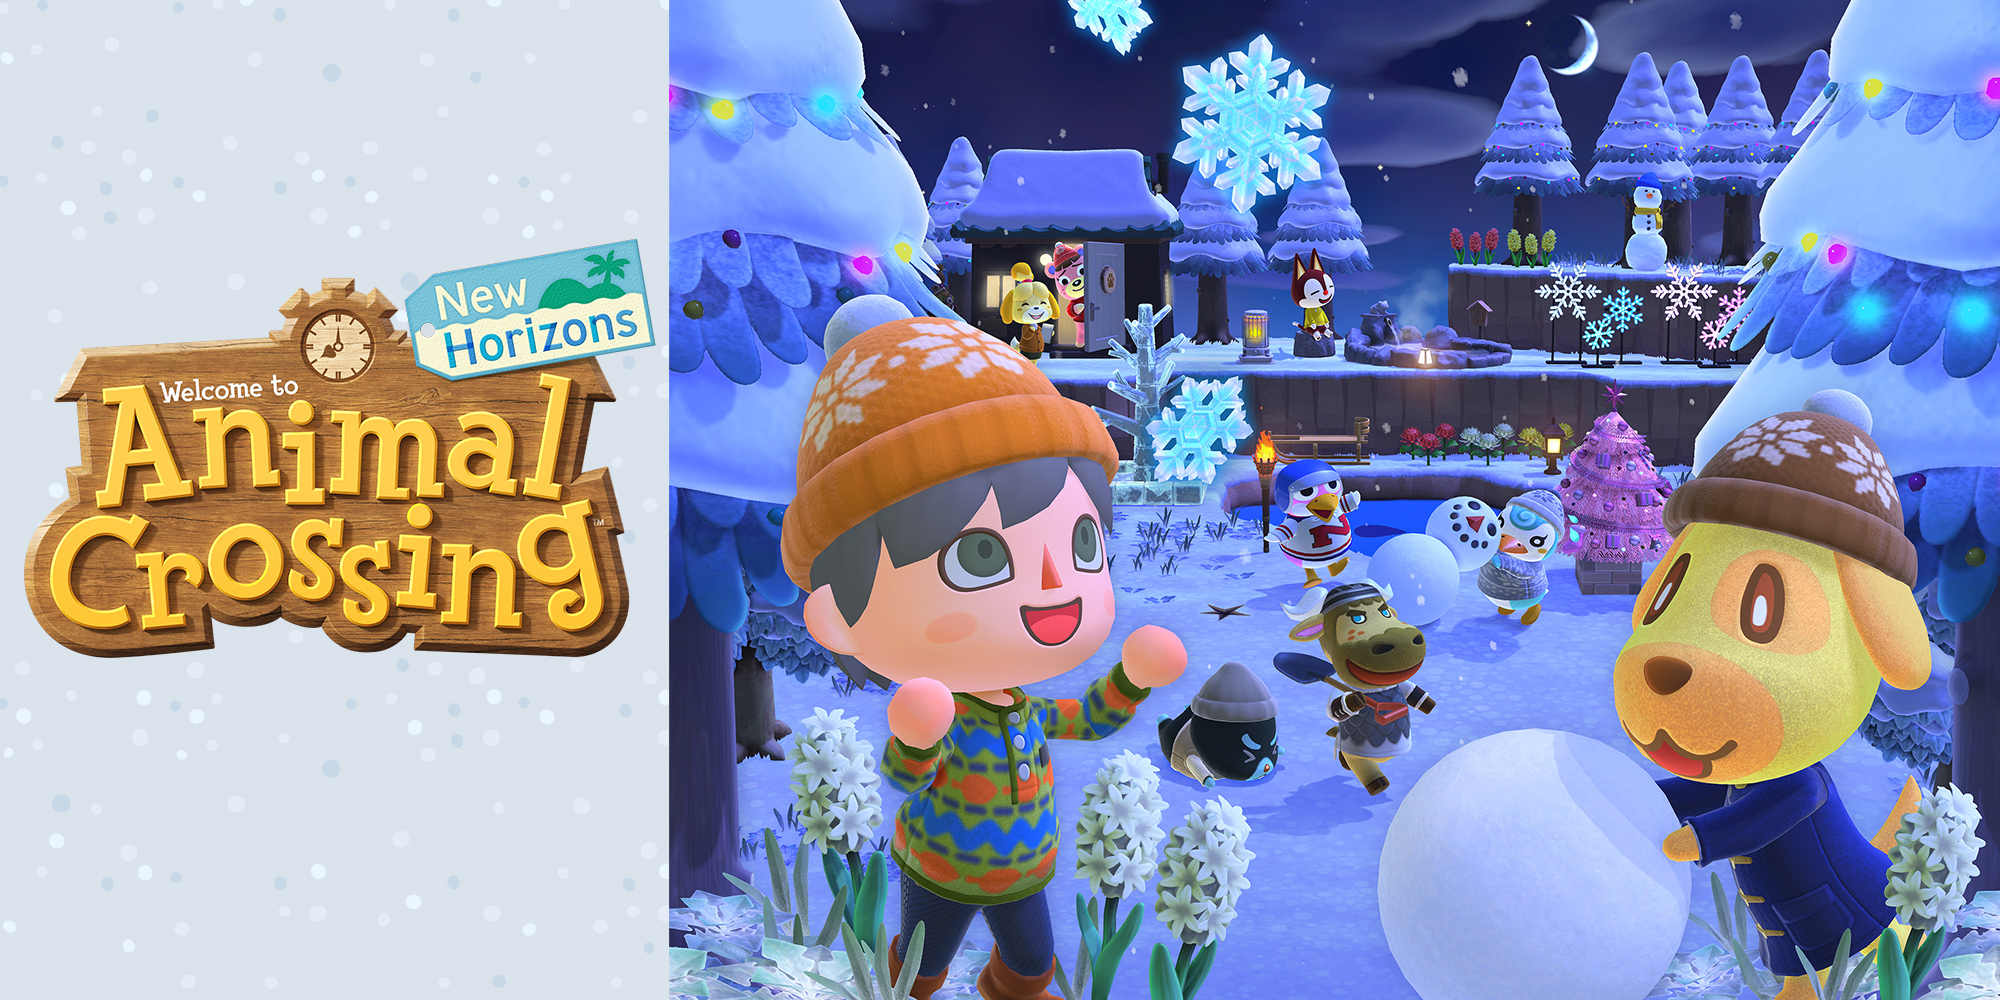 Have a cosy time this winter in Animal Crossing: New Horizons!